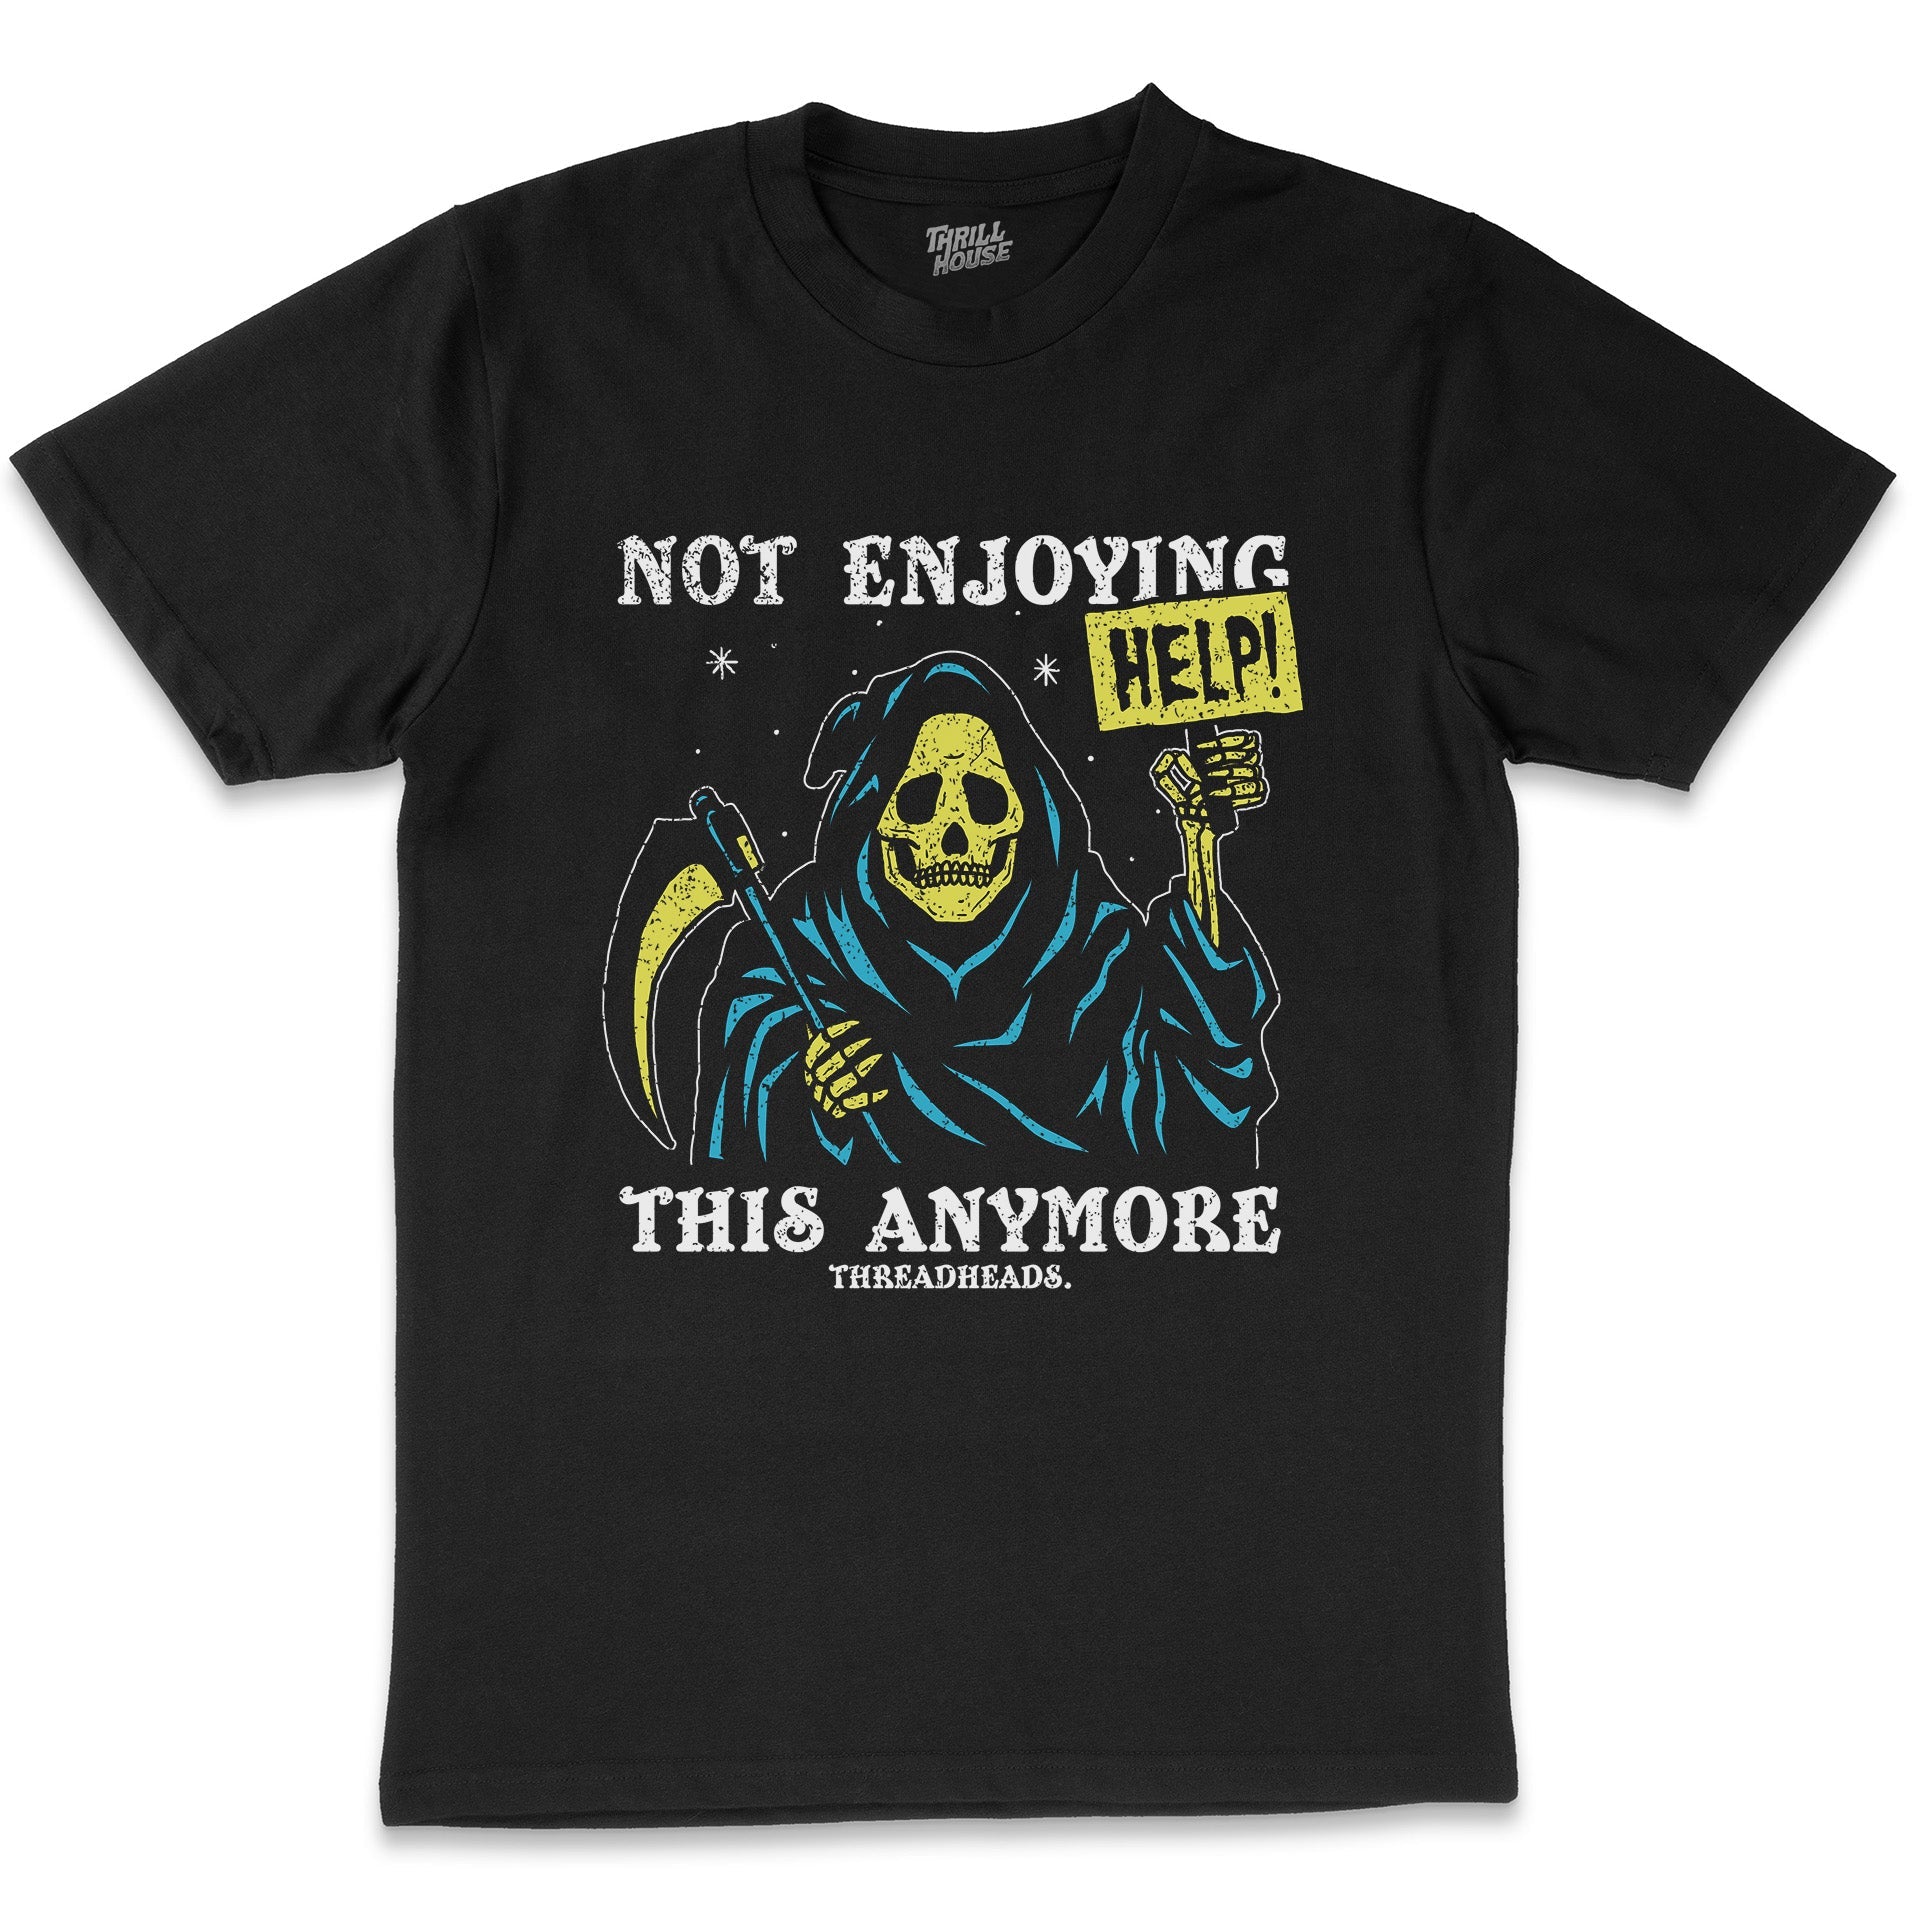 Not Enjoying This Anymore Funny Grim Reaper Anxiety Dark Humour Cotton T-Shirt